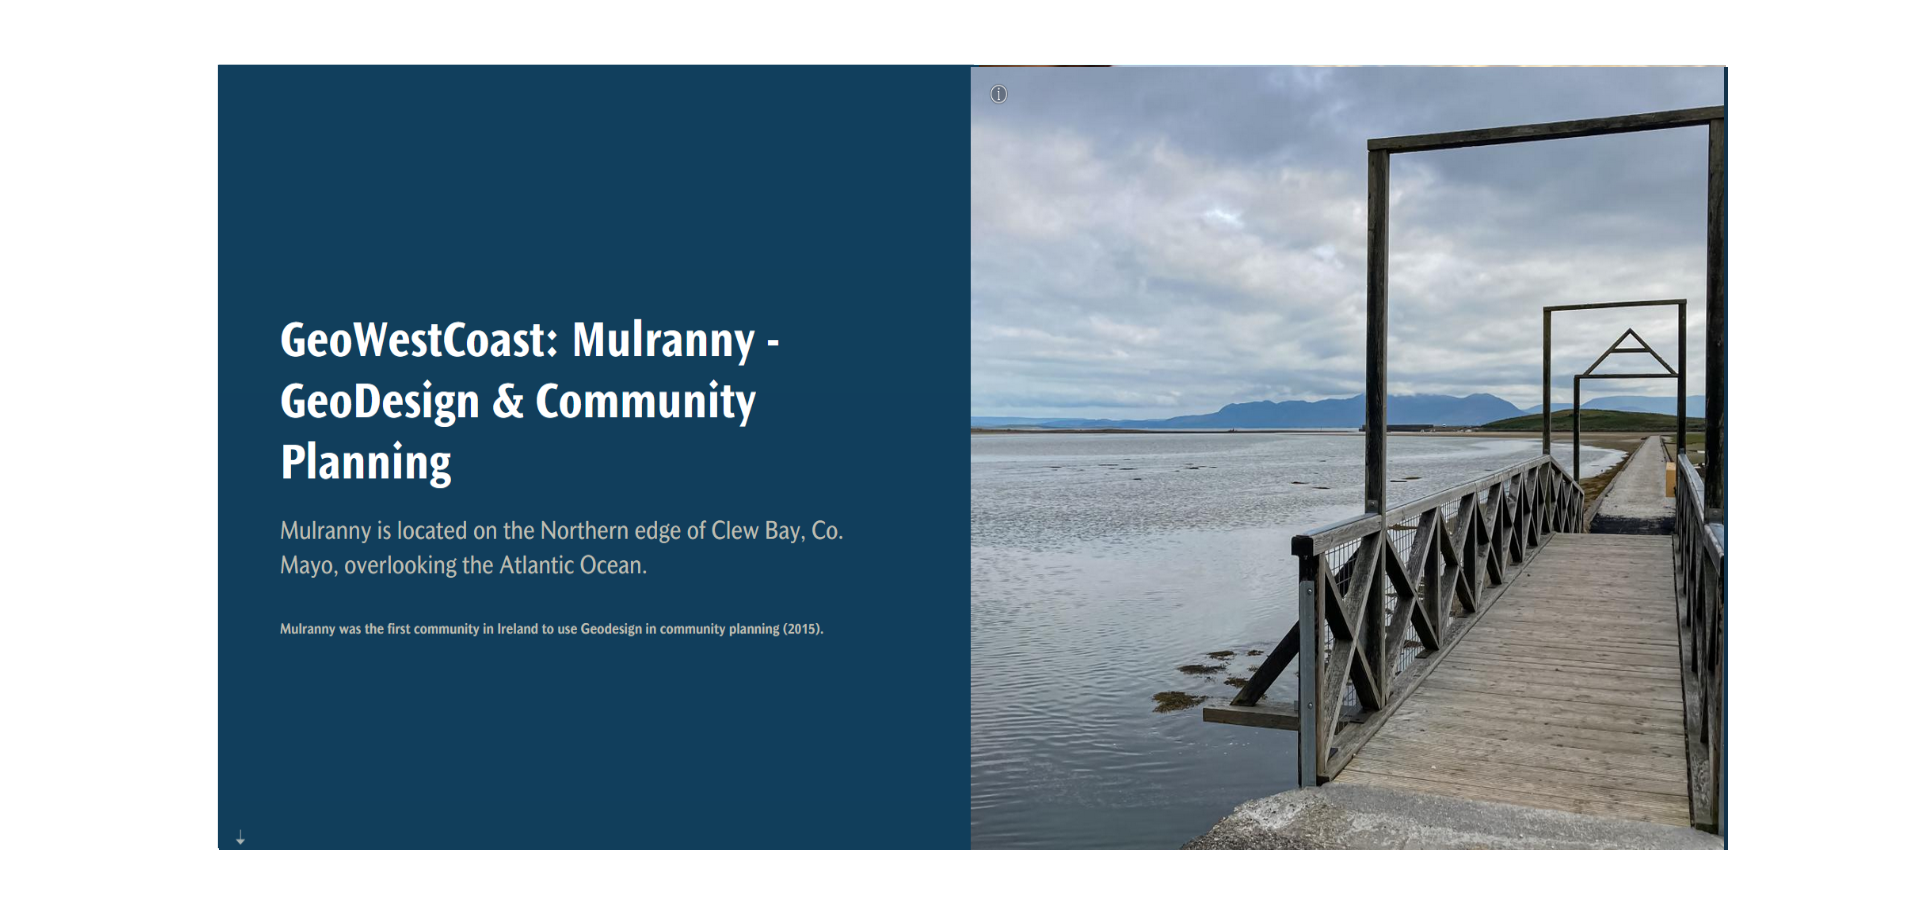 Mulranny was the first community in Ireland to use Geodesign in community planning (2015).